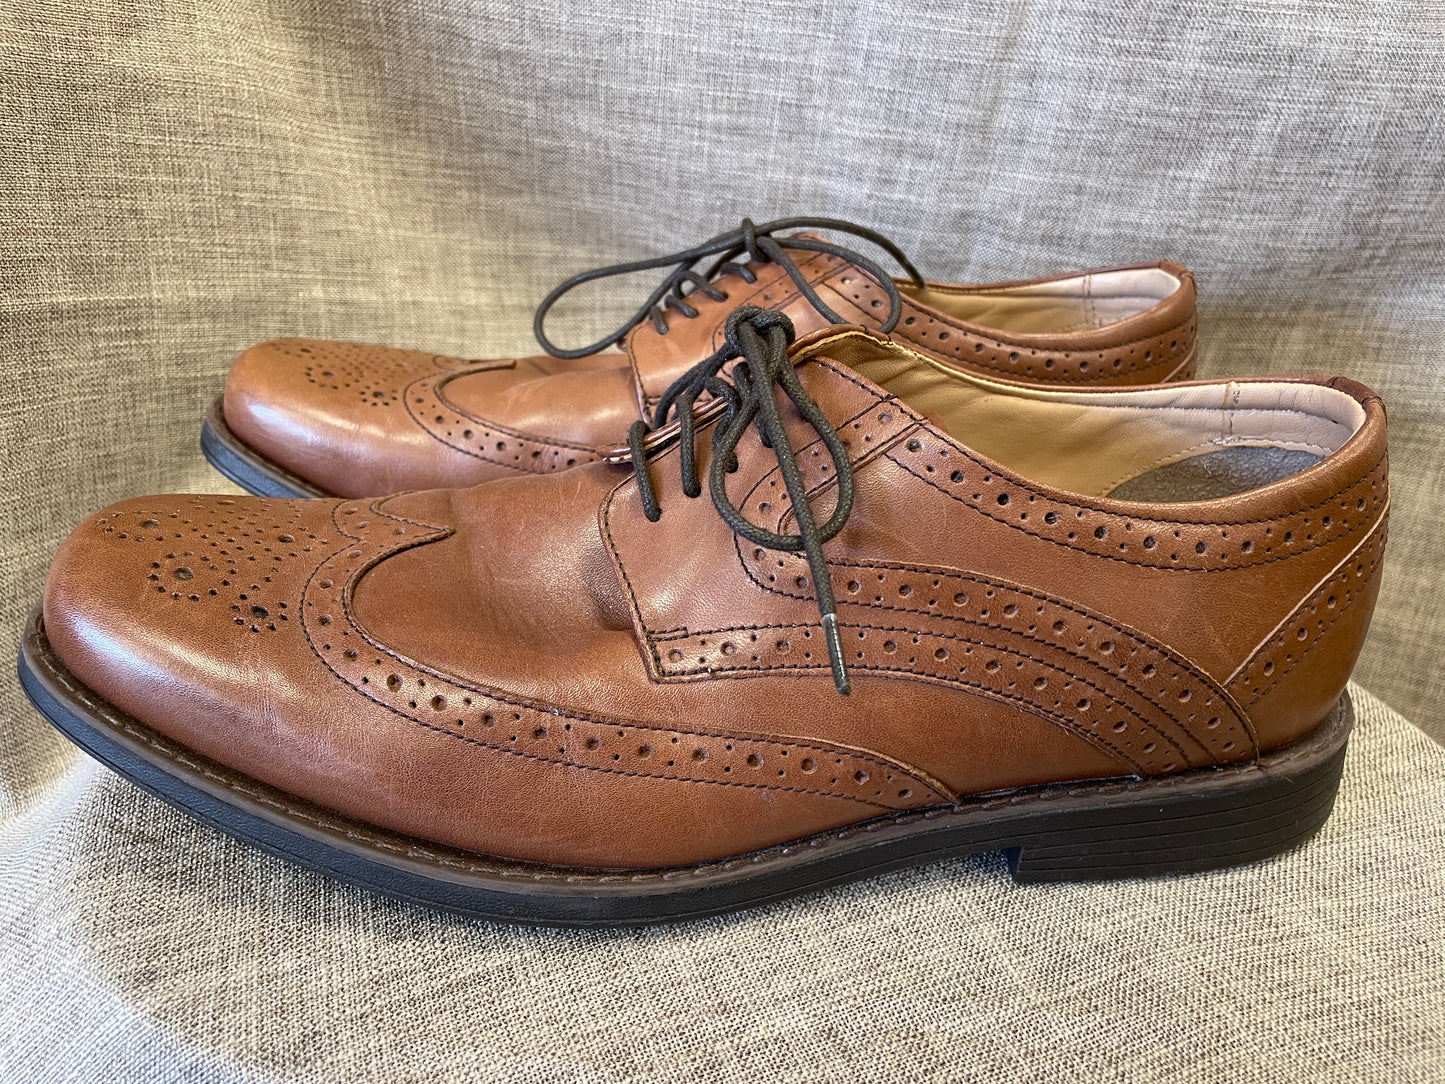 Henley Brown Leather Brogue Shoes UK 10